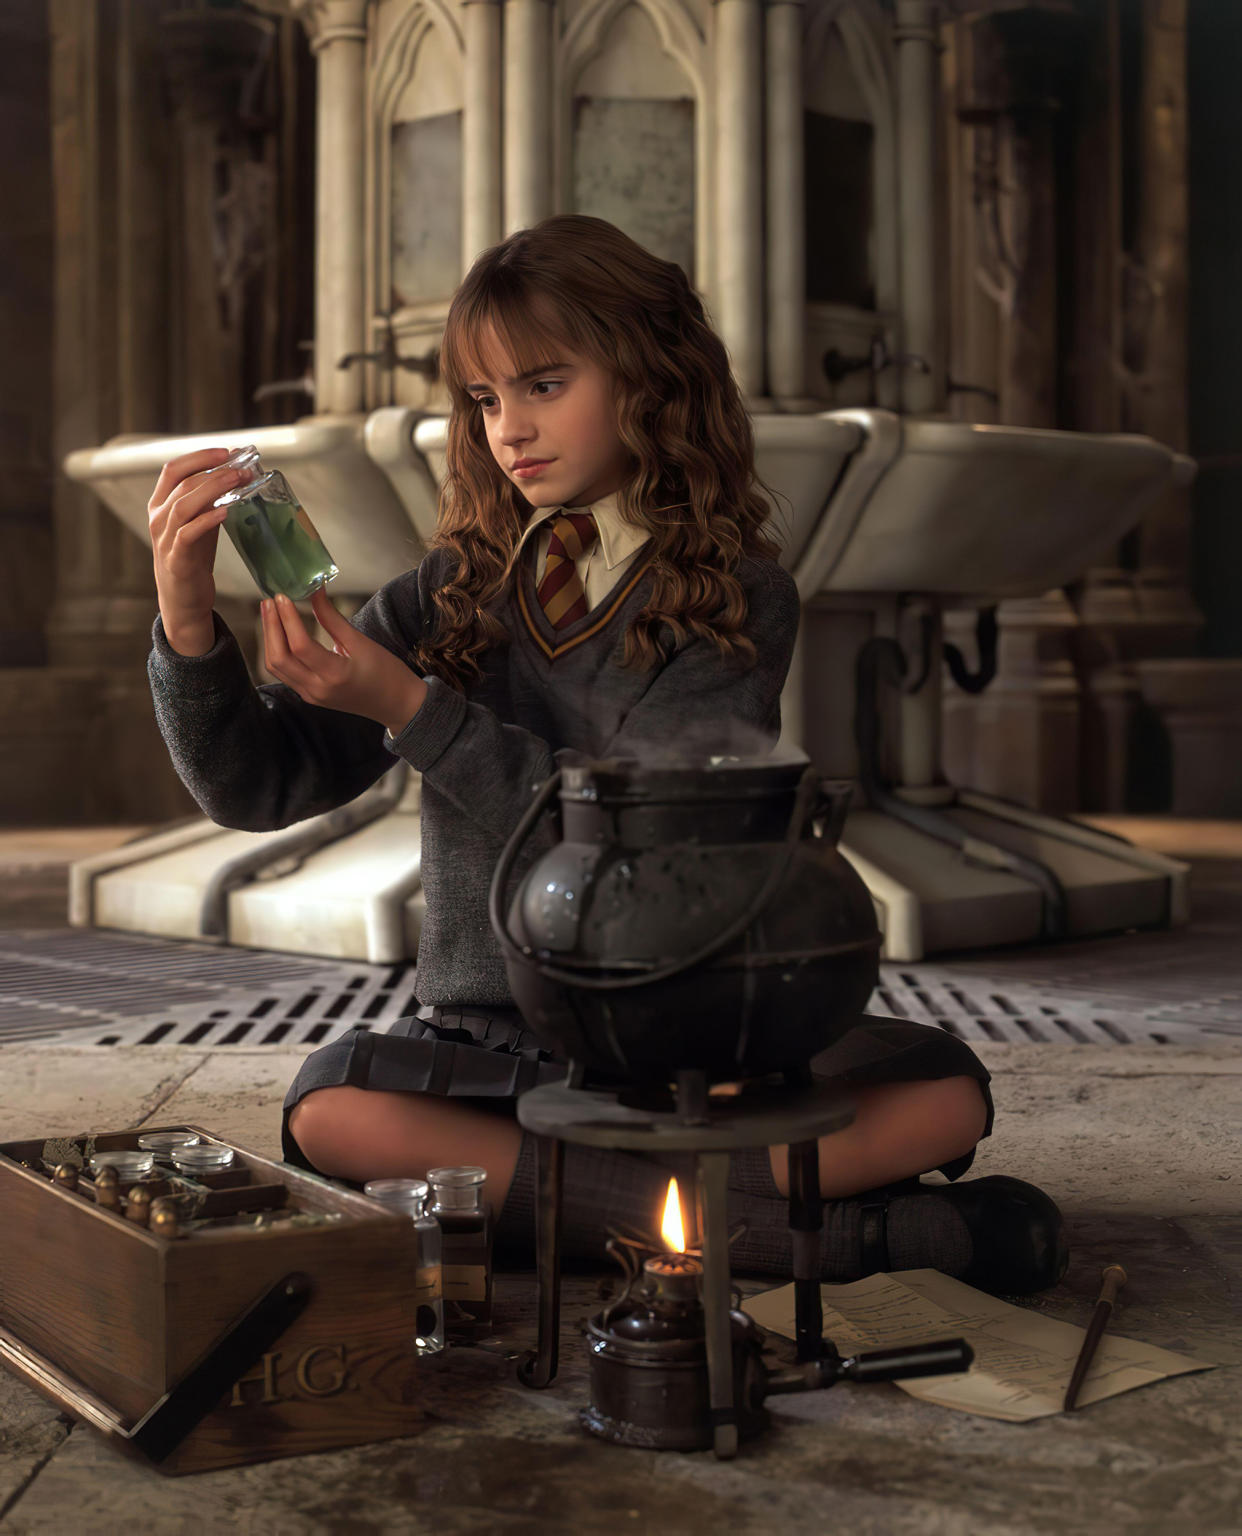 Emma Watson as Hermione Granger in the Movie Harry Potter and the Chamber of Secrets - Promotional Movie Picture (Alamy Stock Photo)